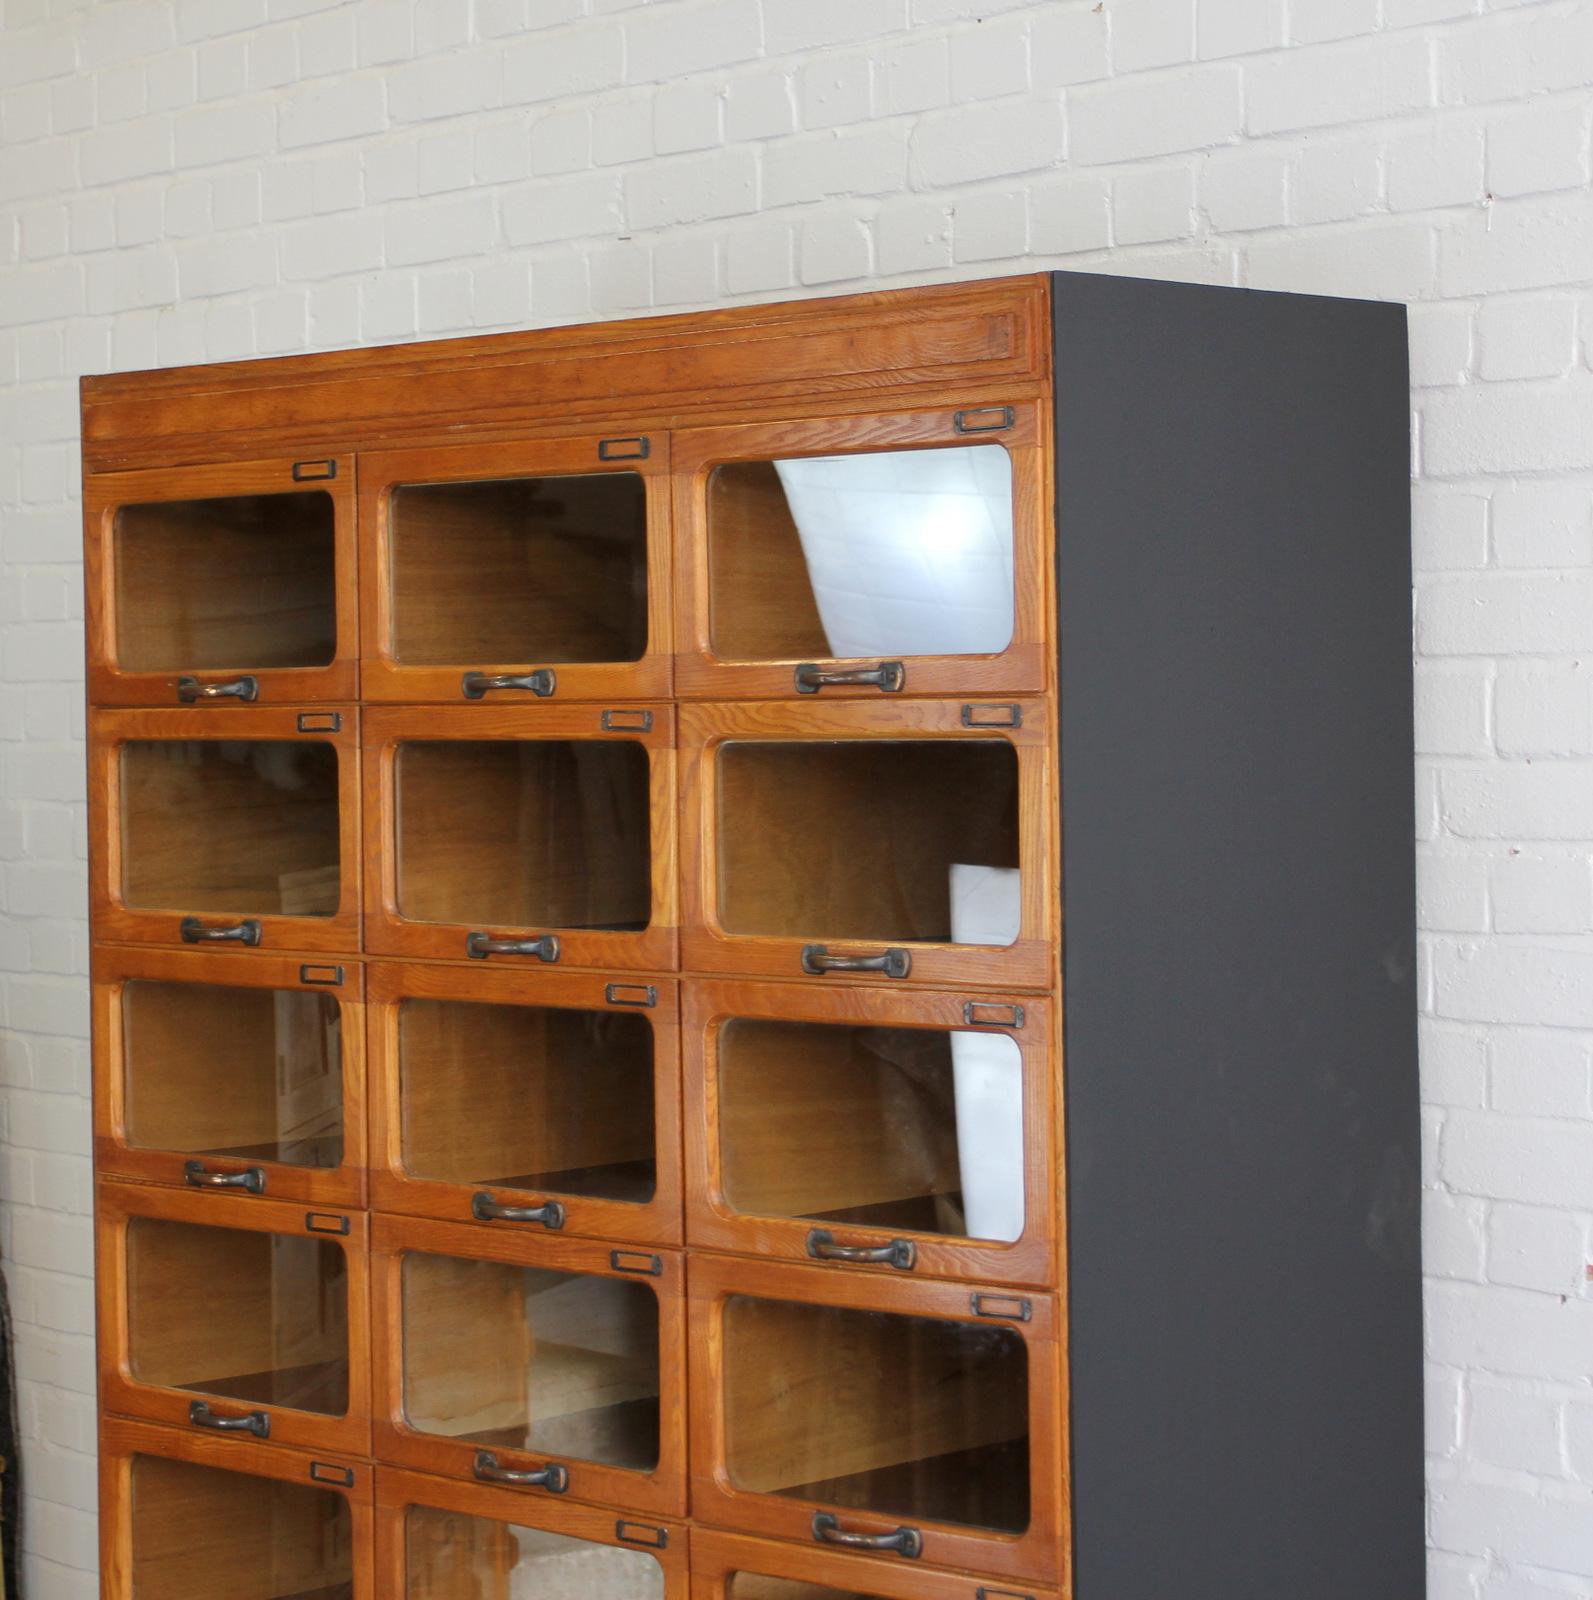 Light oak window fronted haberdashery drawers, circa 1940s

- 18 window fronted drawers
- Shelving space at the bottom
- Copper handles and card holders
- Light oak frame and drawers
- Matt black ply sides
- Originally used in a department